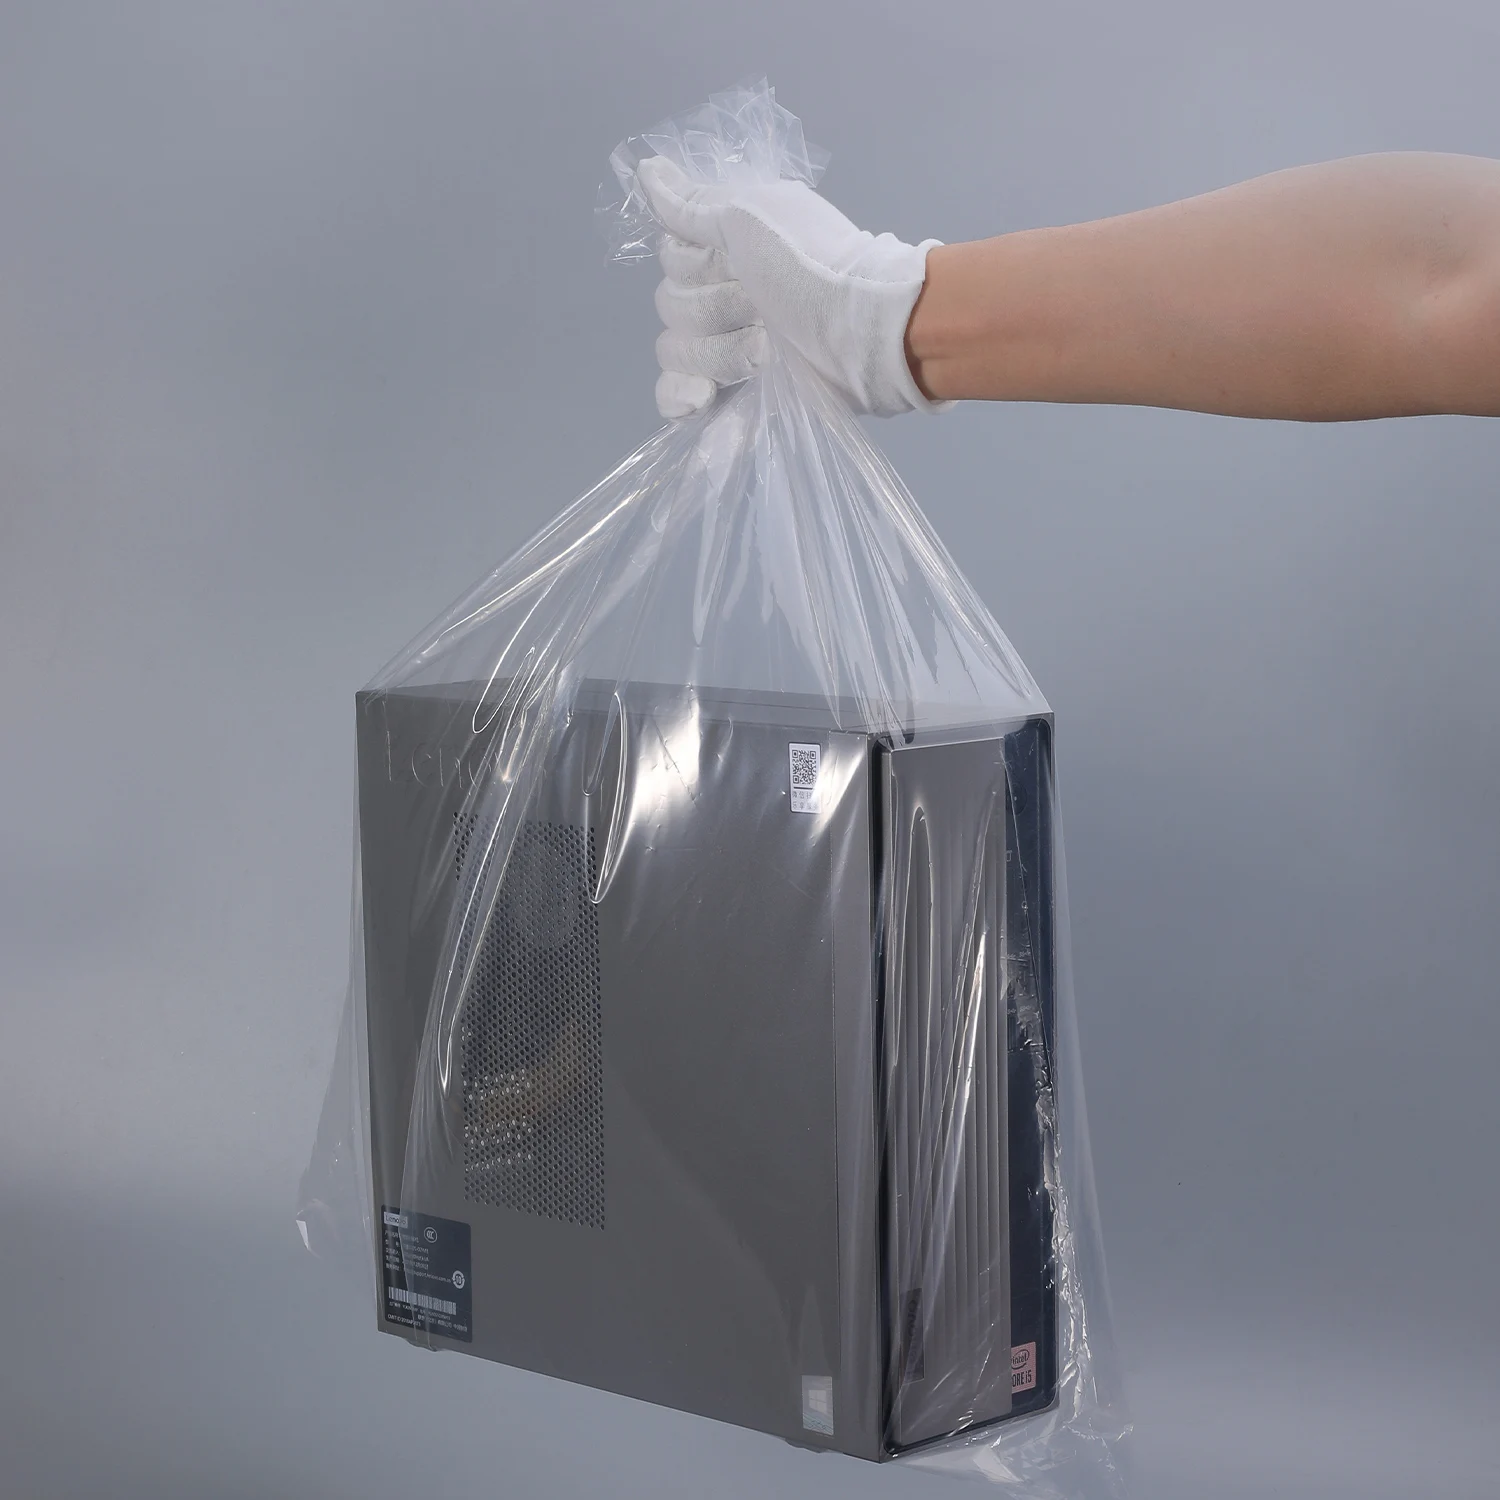 folding chemical bags waterproof for large